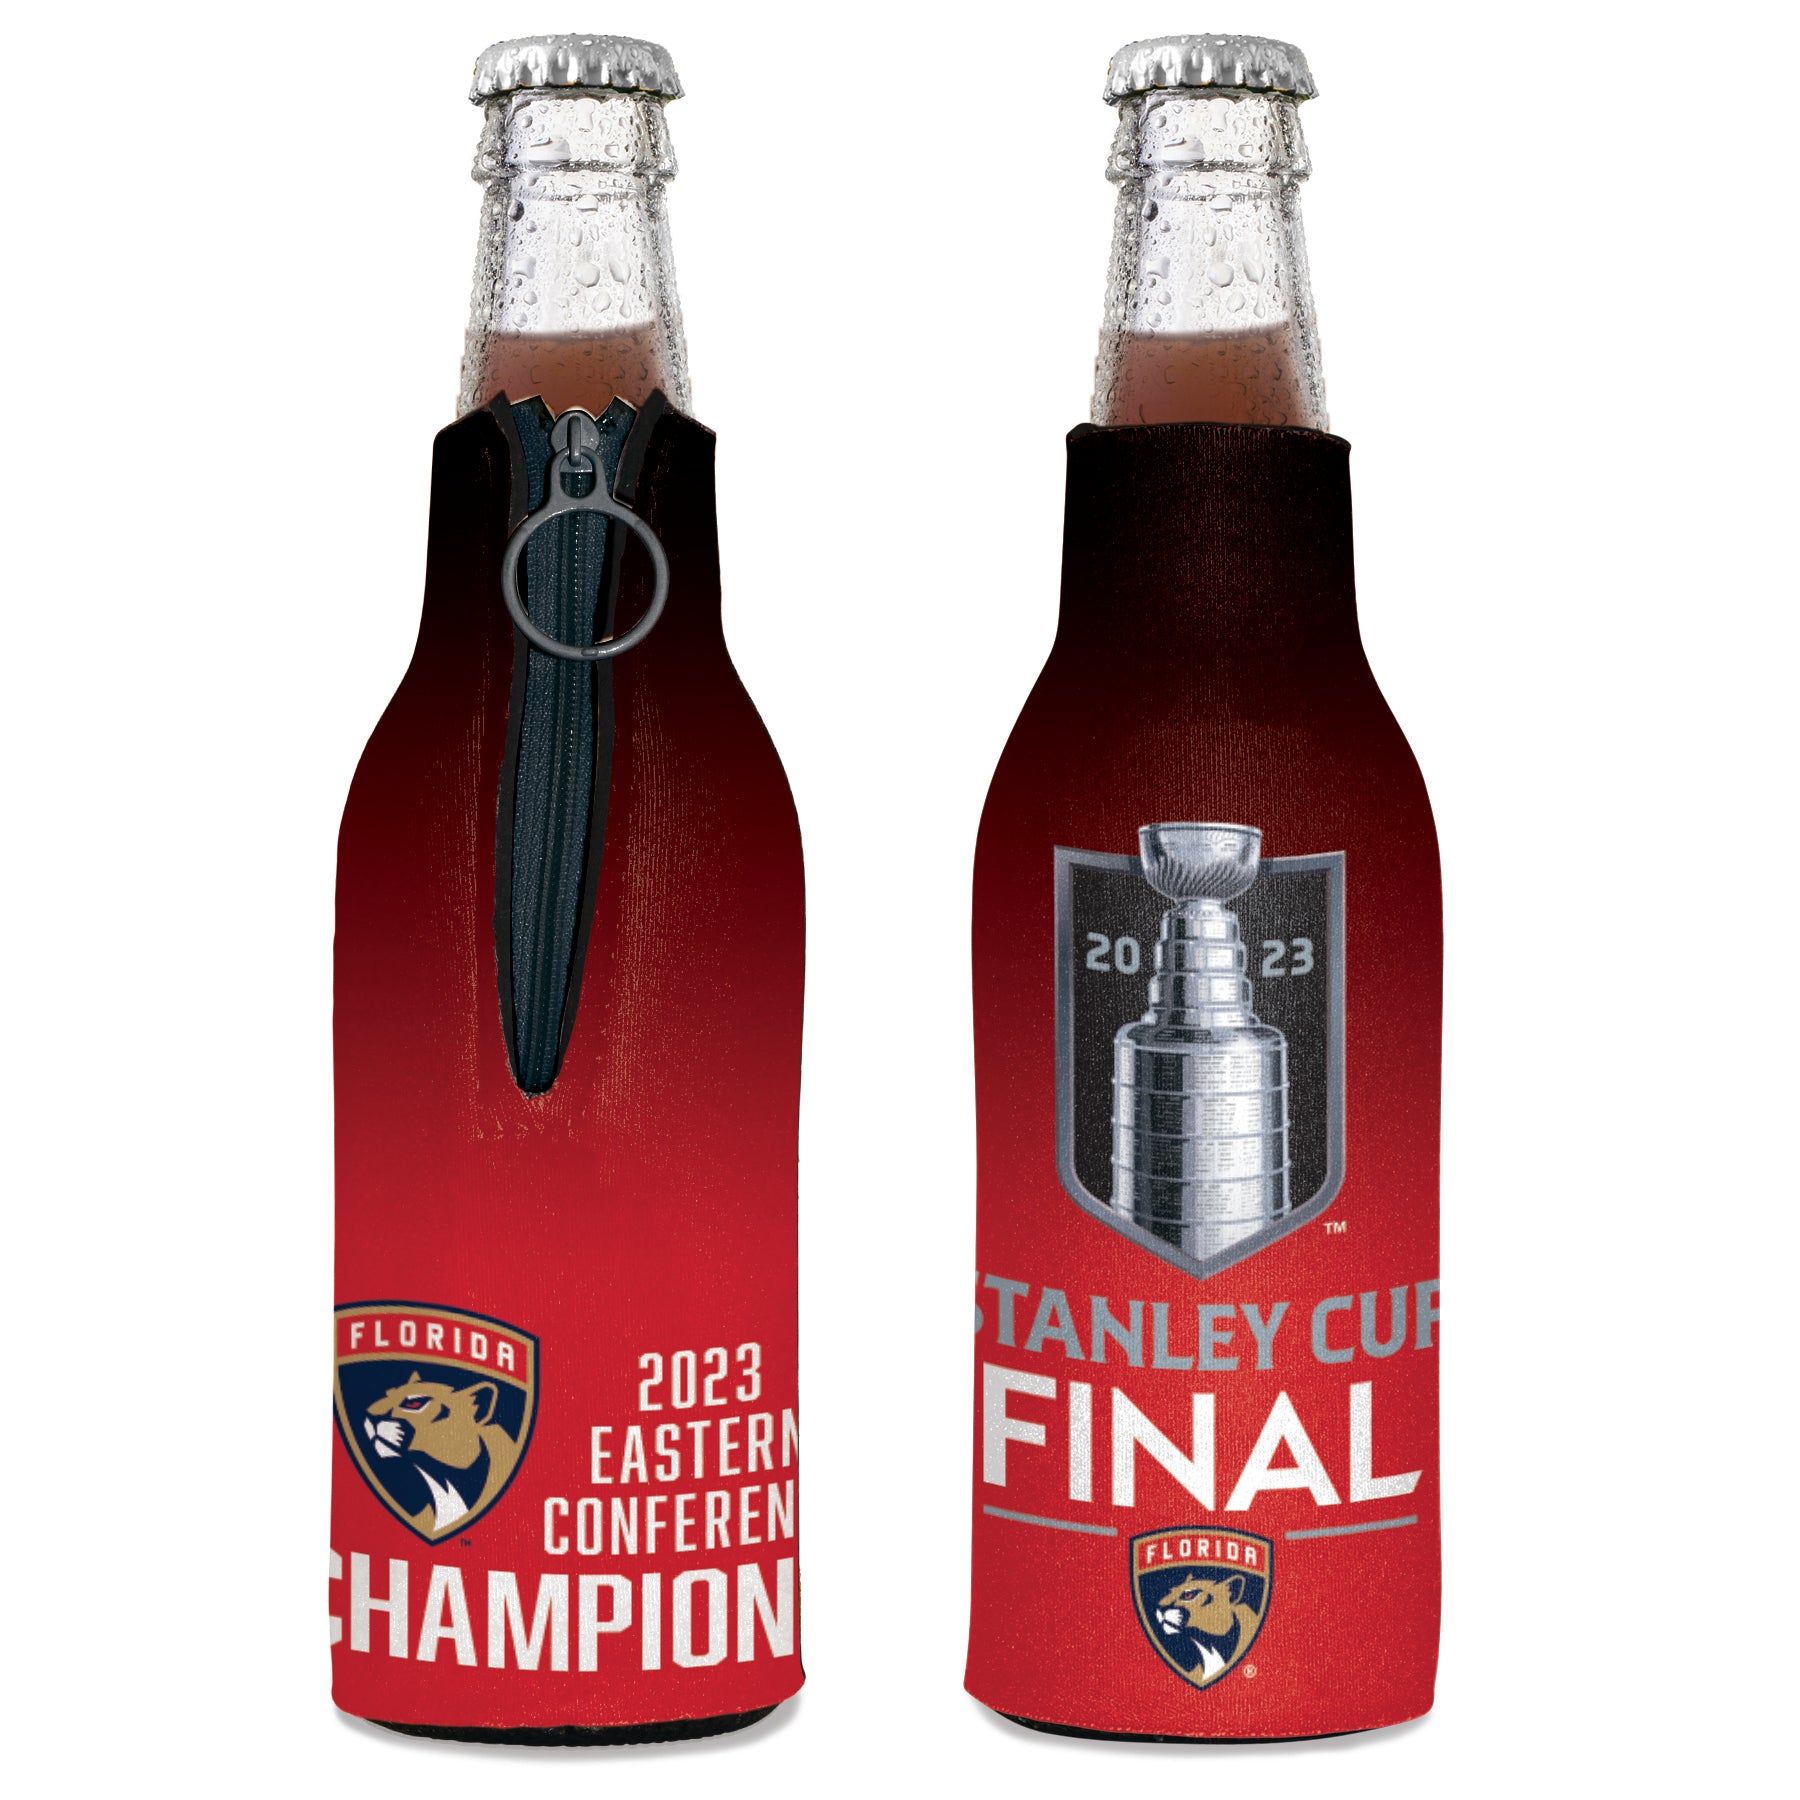 Florida Panthers 2023 Eastern Conference Champions Bottle Cooler - 12 OZ